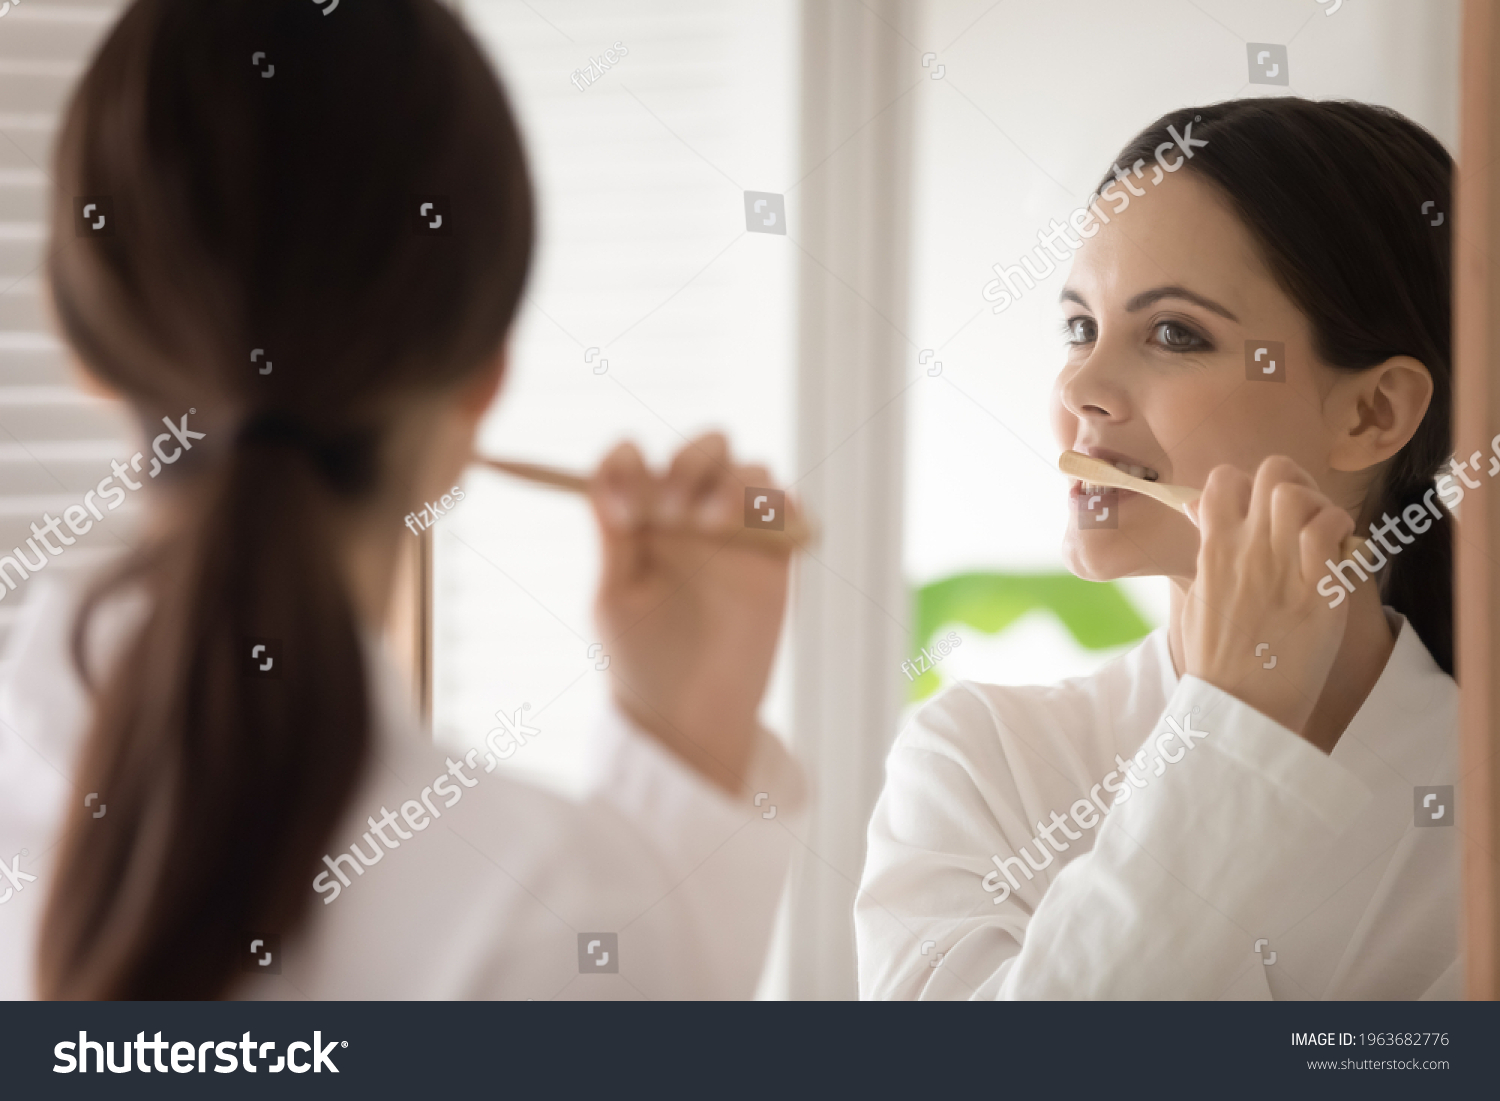 Young woman in bathrobe brushing teeth with wooden bamboo toothbrush. Teen girl choosing eco friendly tools for morning bath routine, oral mouth hygiene, protection from caries. Mirror reflection #1963682776